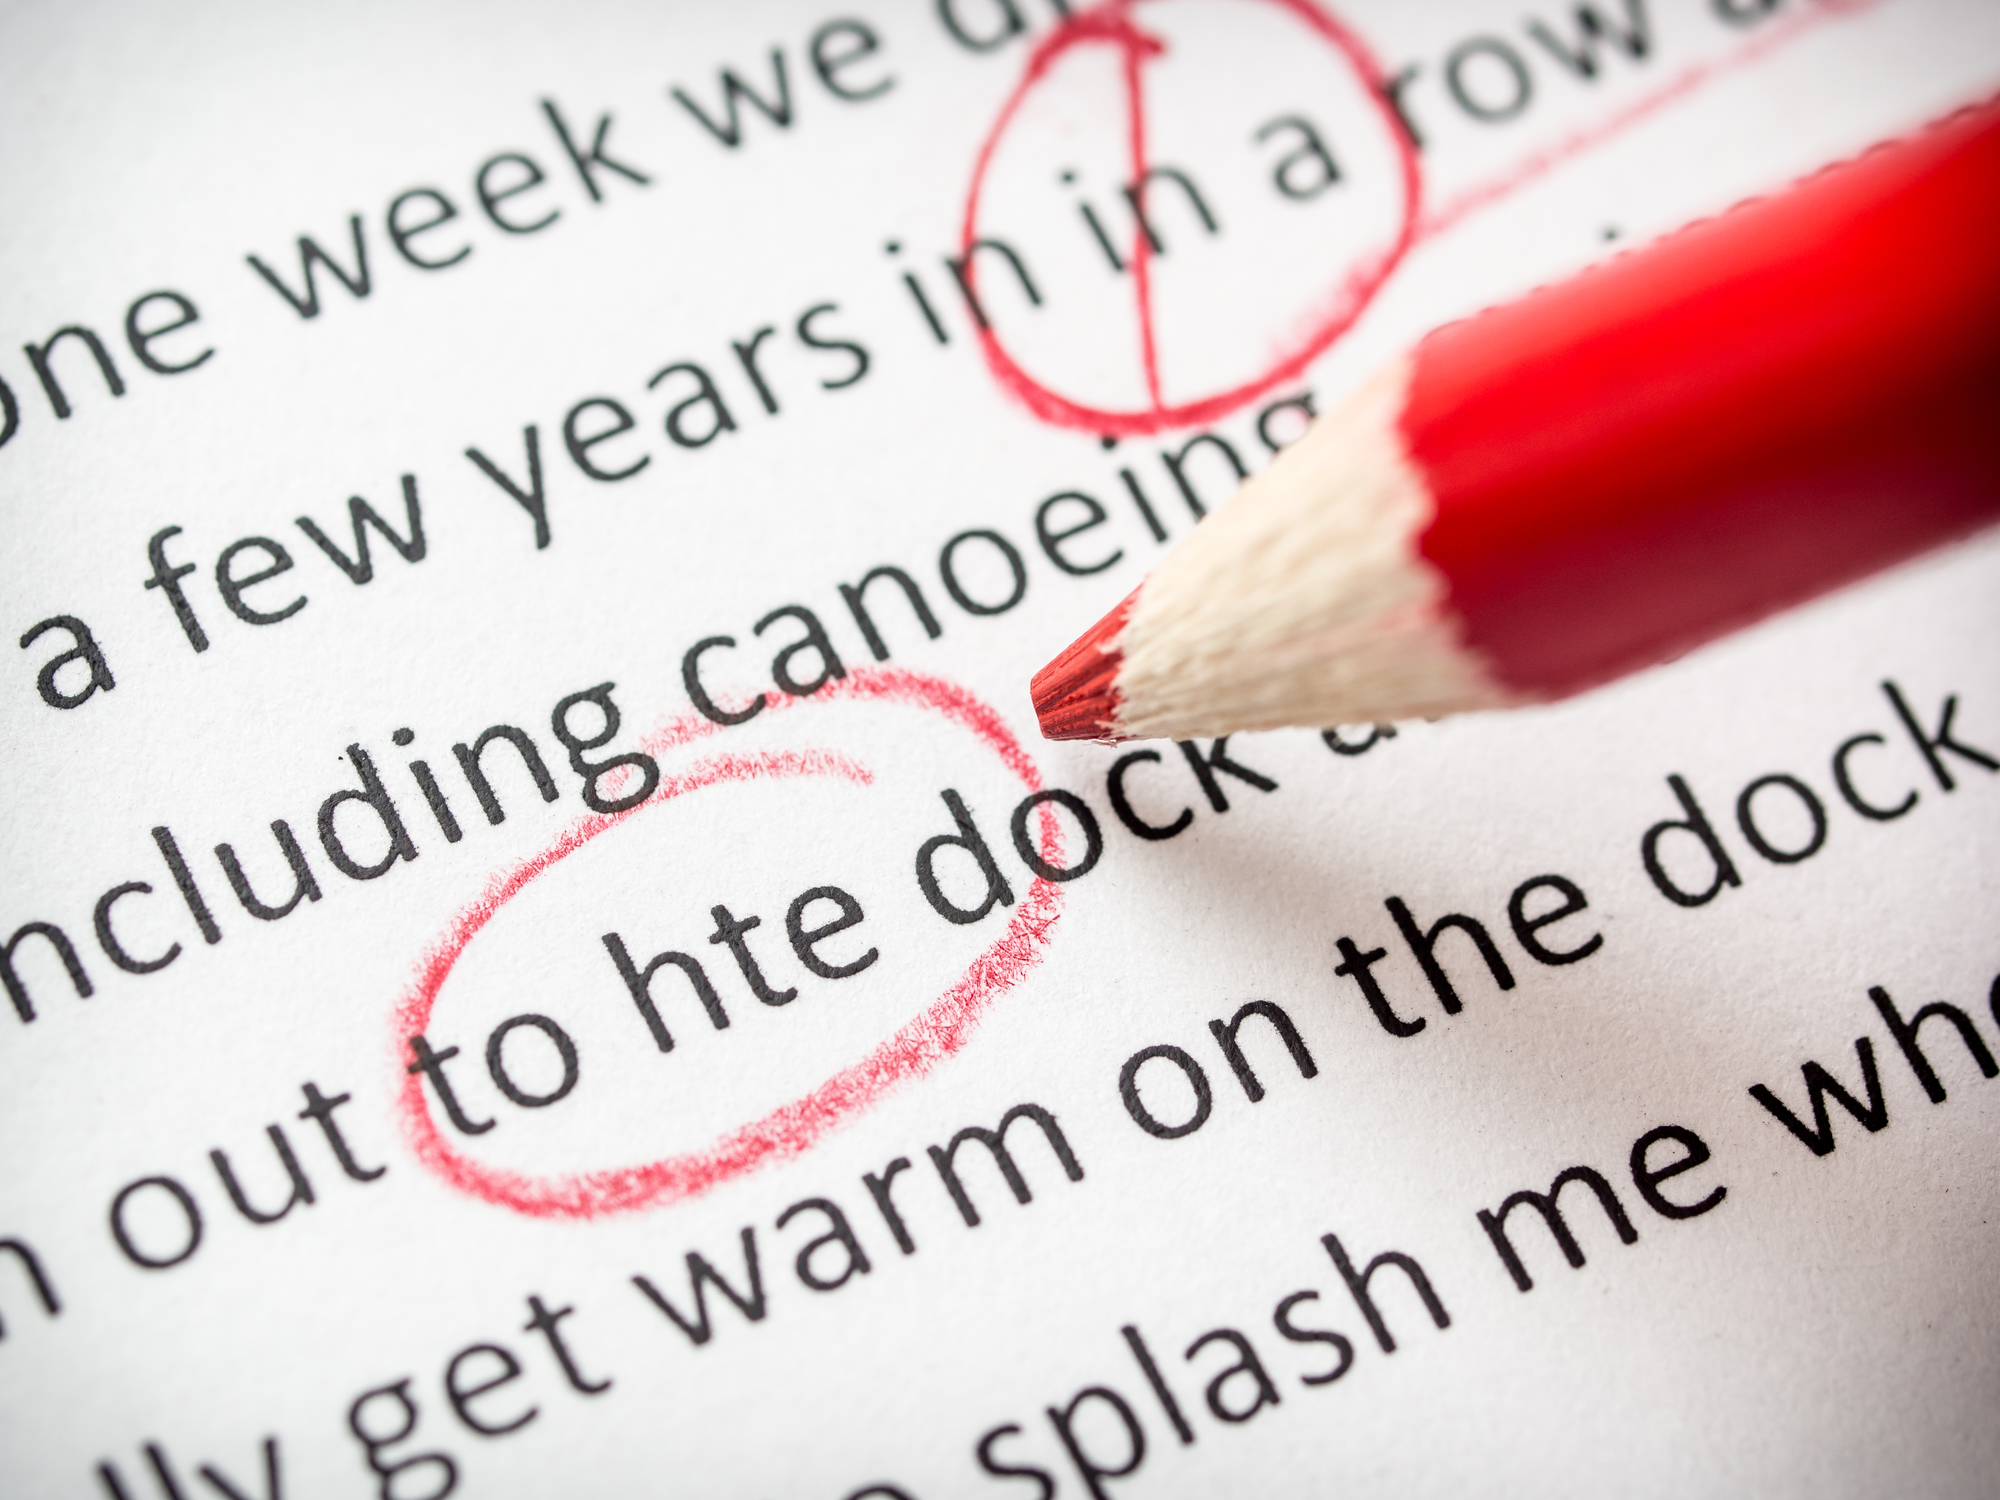 (Image Alt Text: A typed document showing red proofreading and copy-editing marks with a red pencil at the ready to catch more errors.)